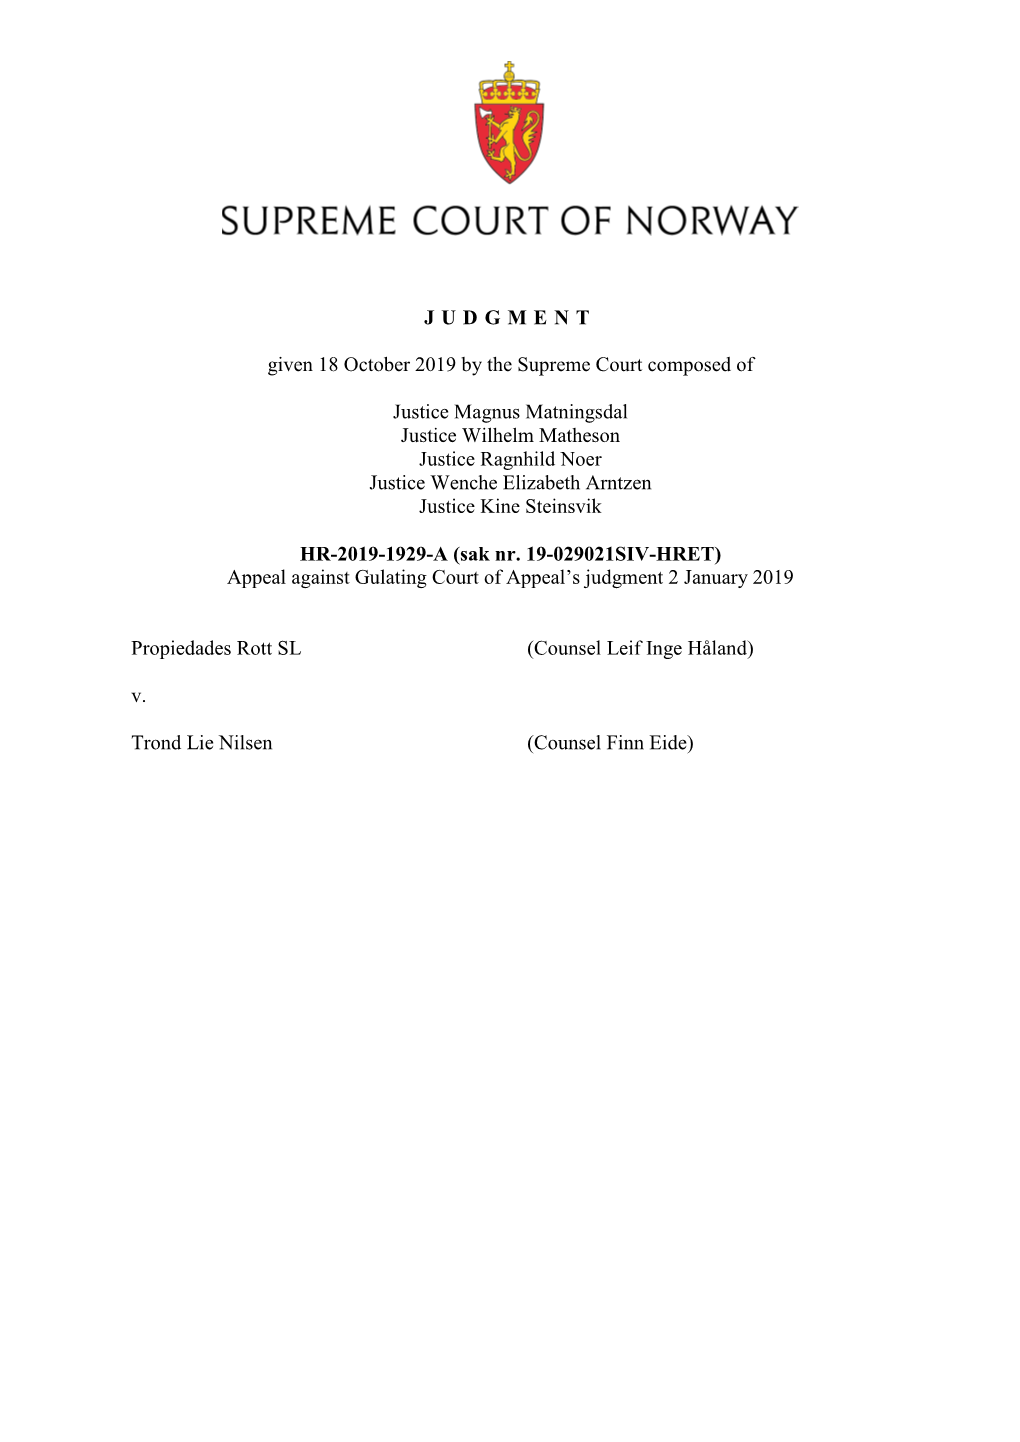 JUDGMENT Given 18 October 2019 by the Supreme Court Composed of Justice Magnus Matningsdal Justice Wilhelm Matheson Justice